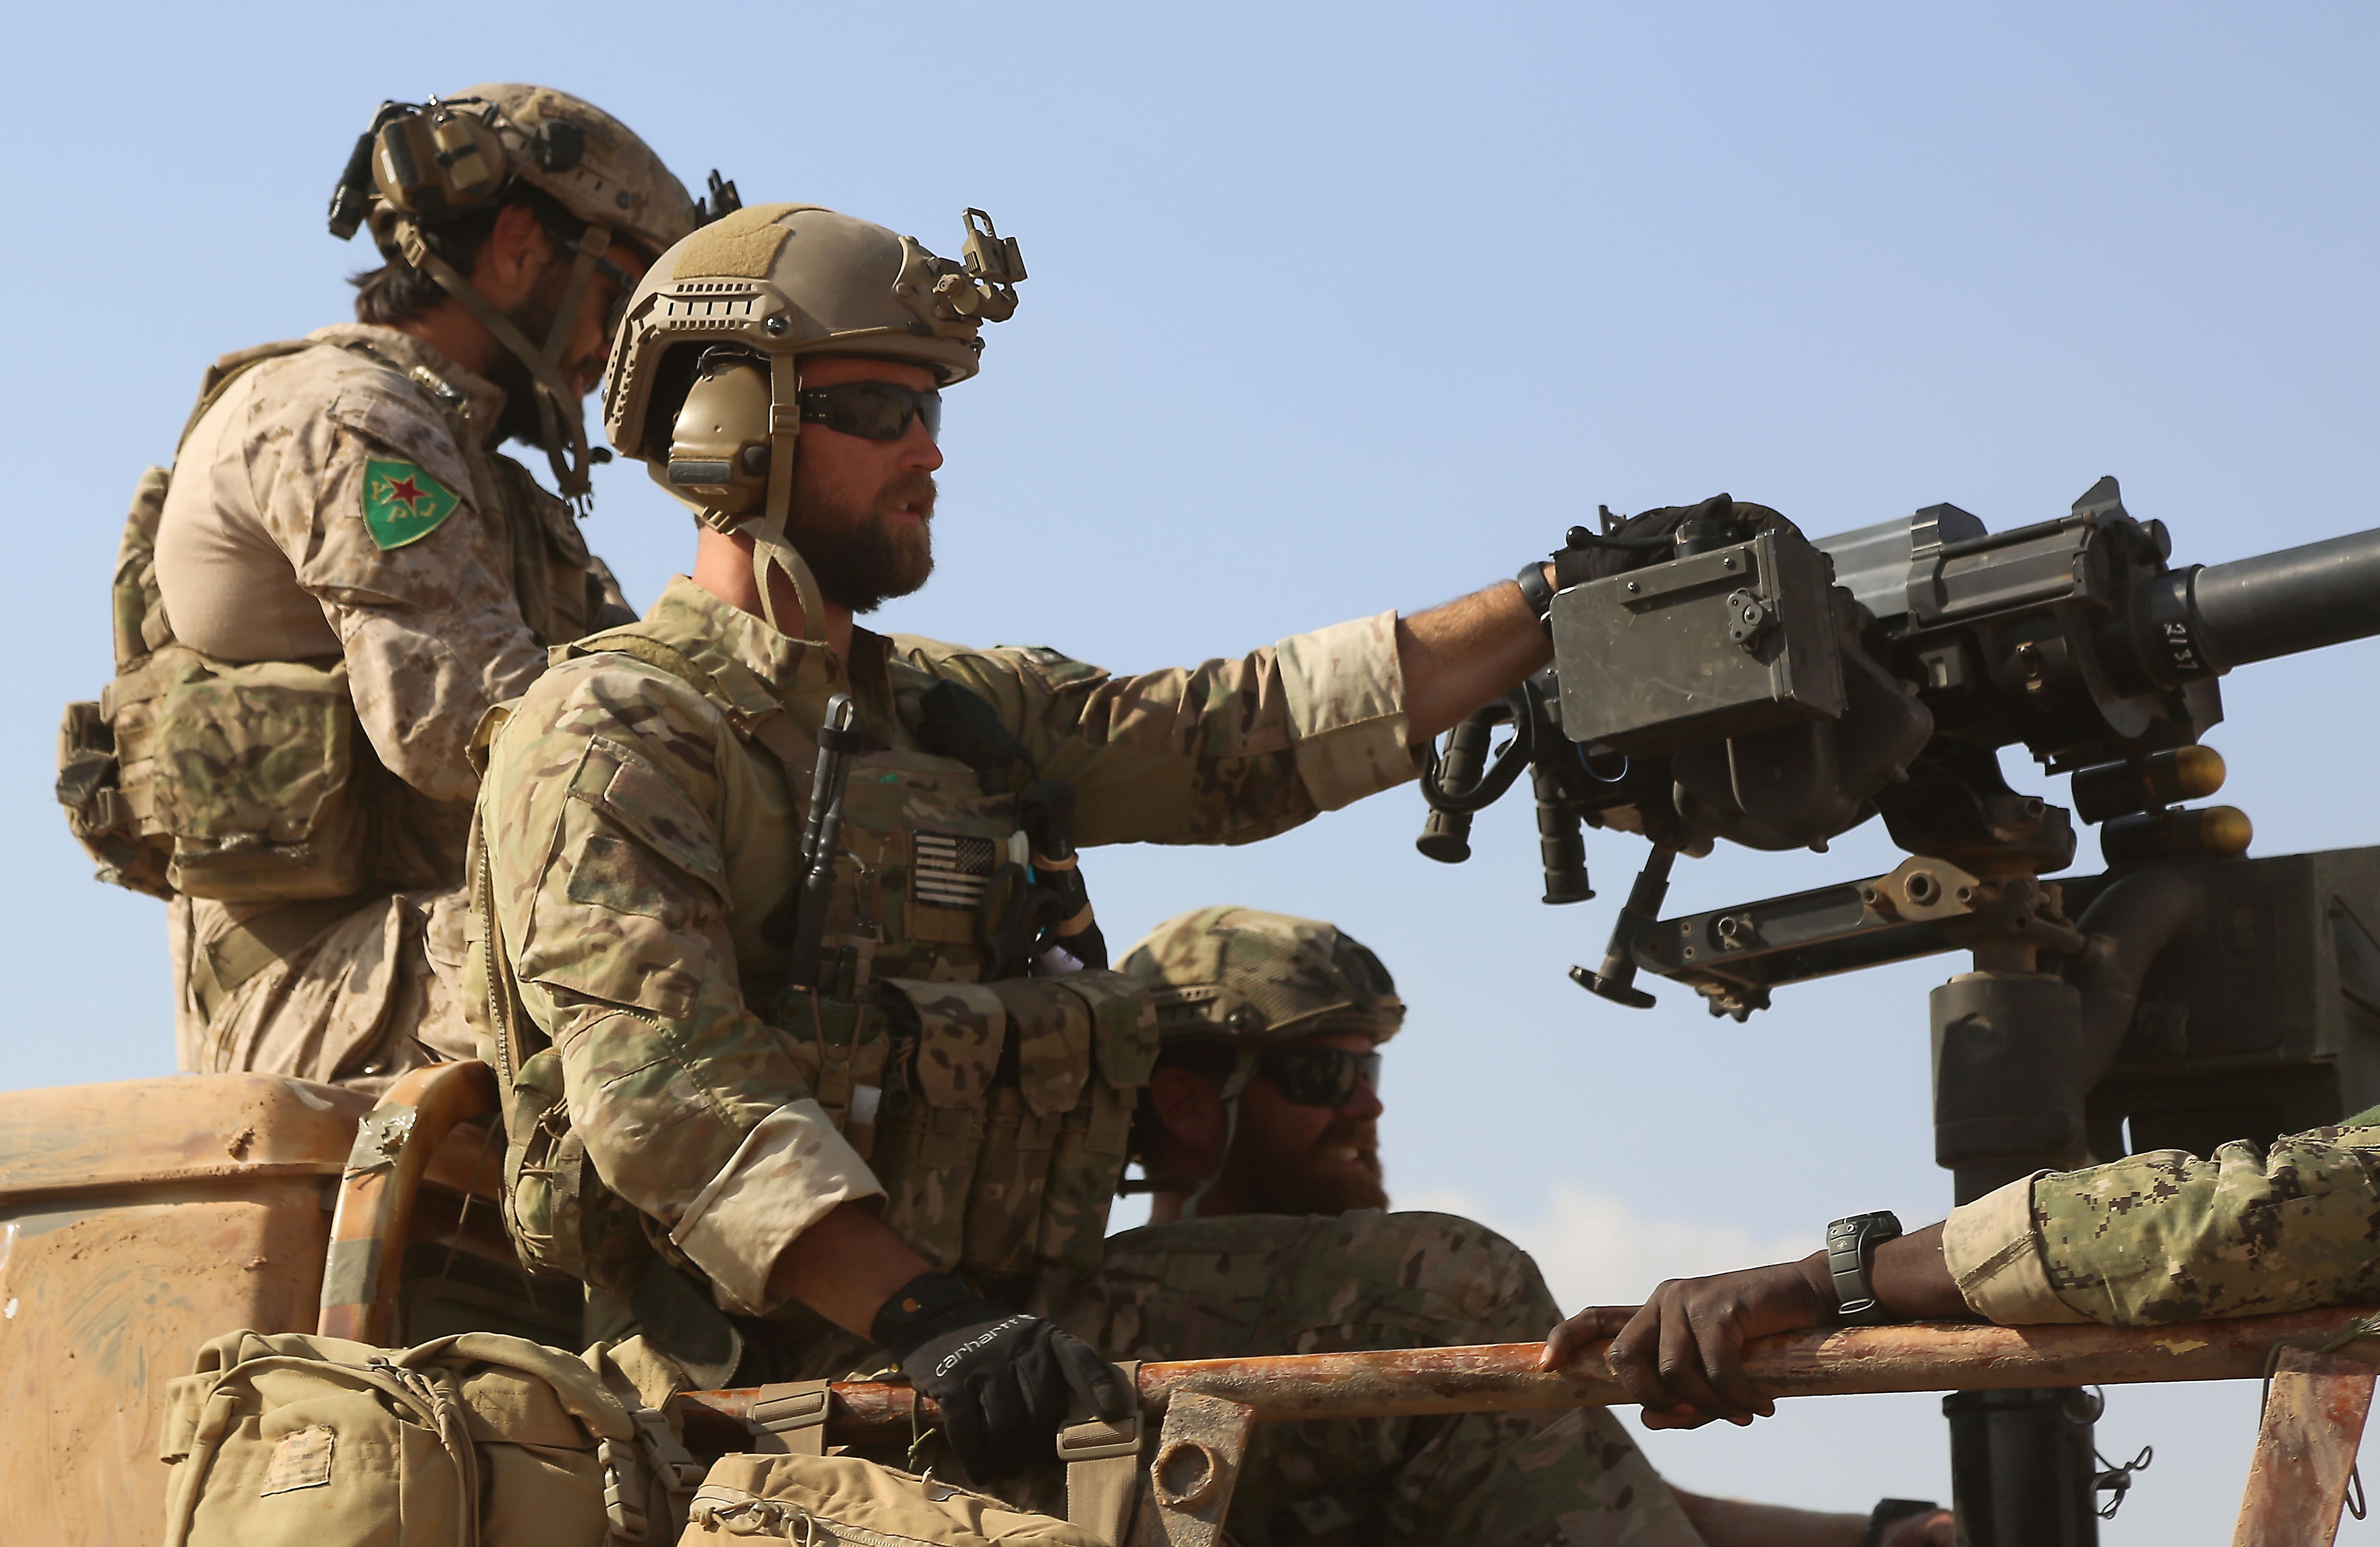 Pentagon denies U.S. special forces are fighting ISIS on front lines in Syria